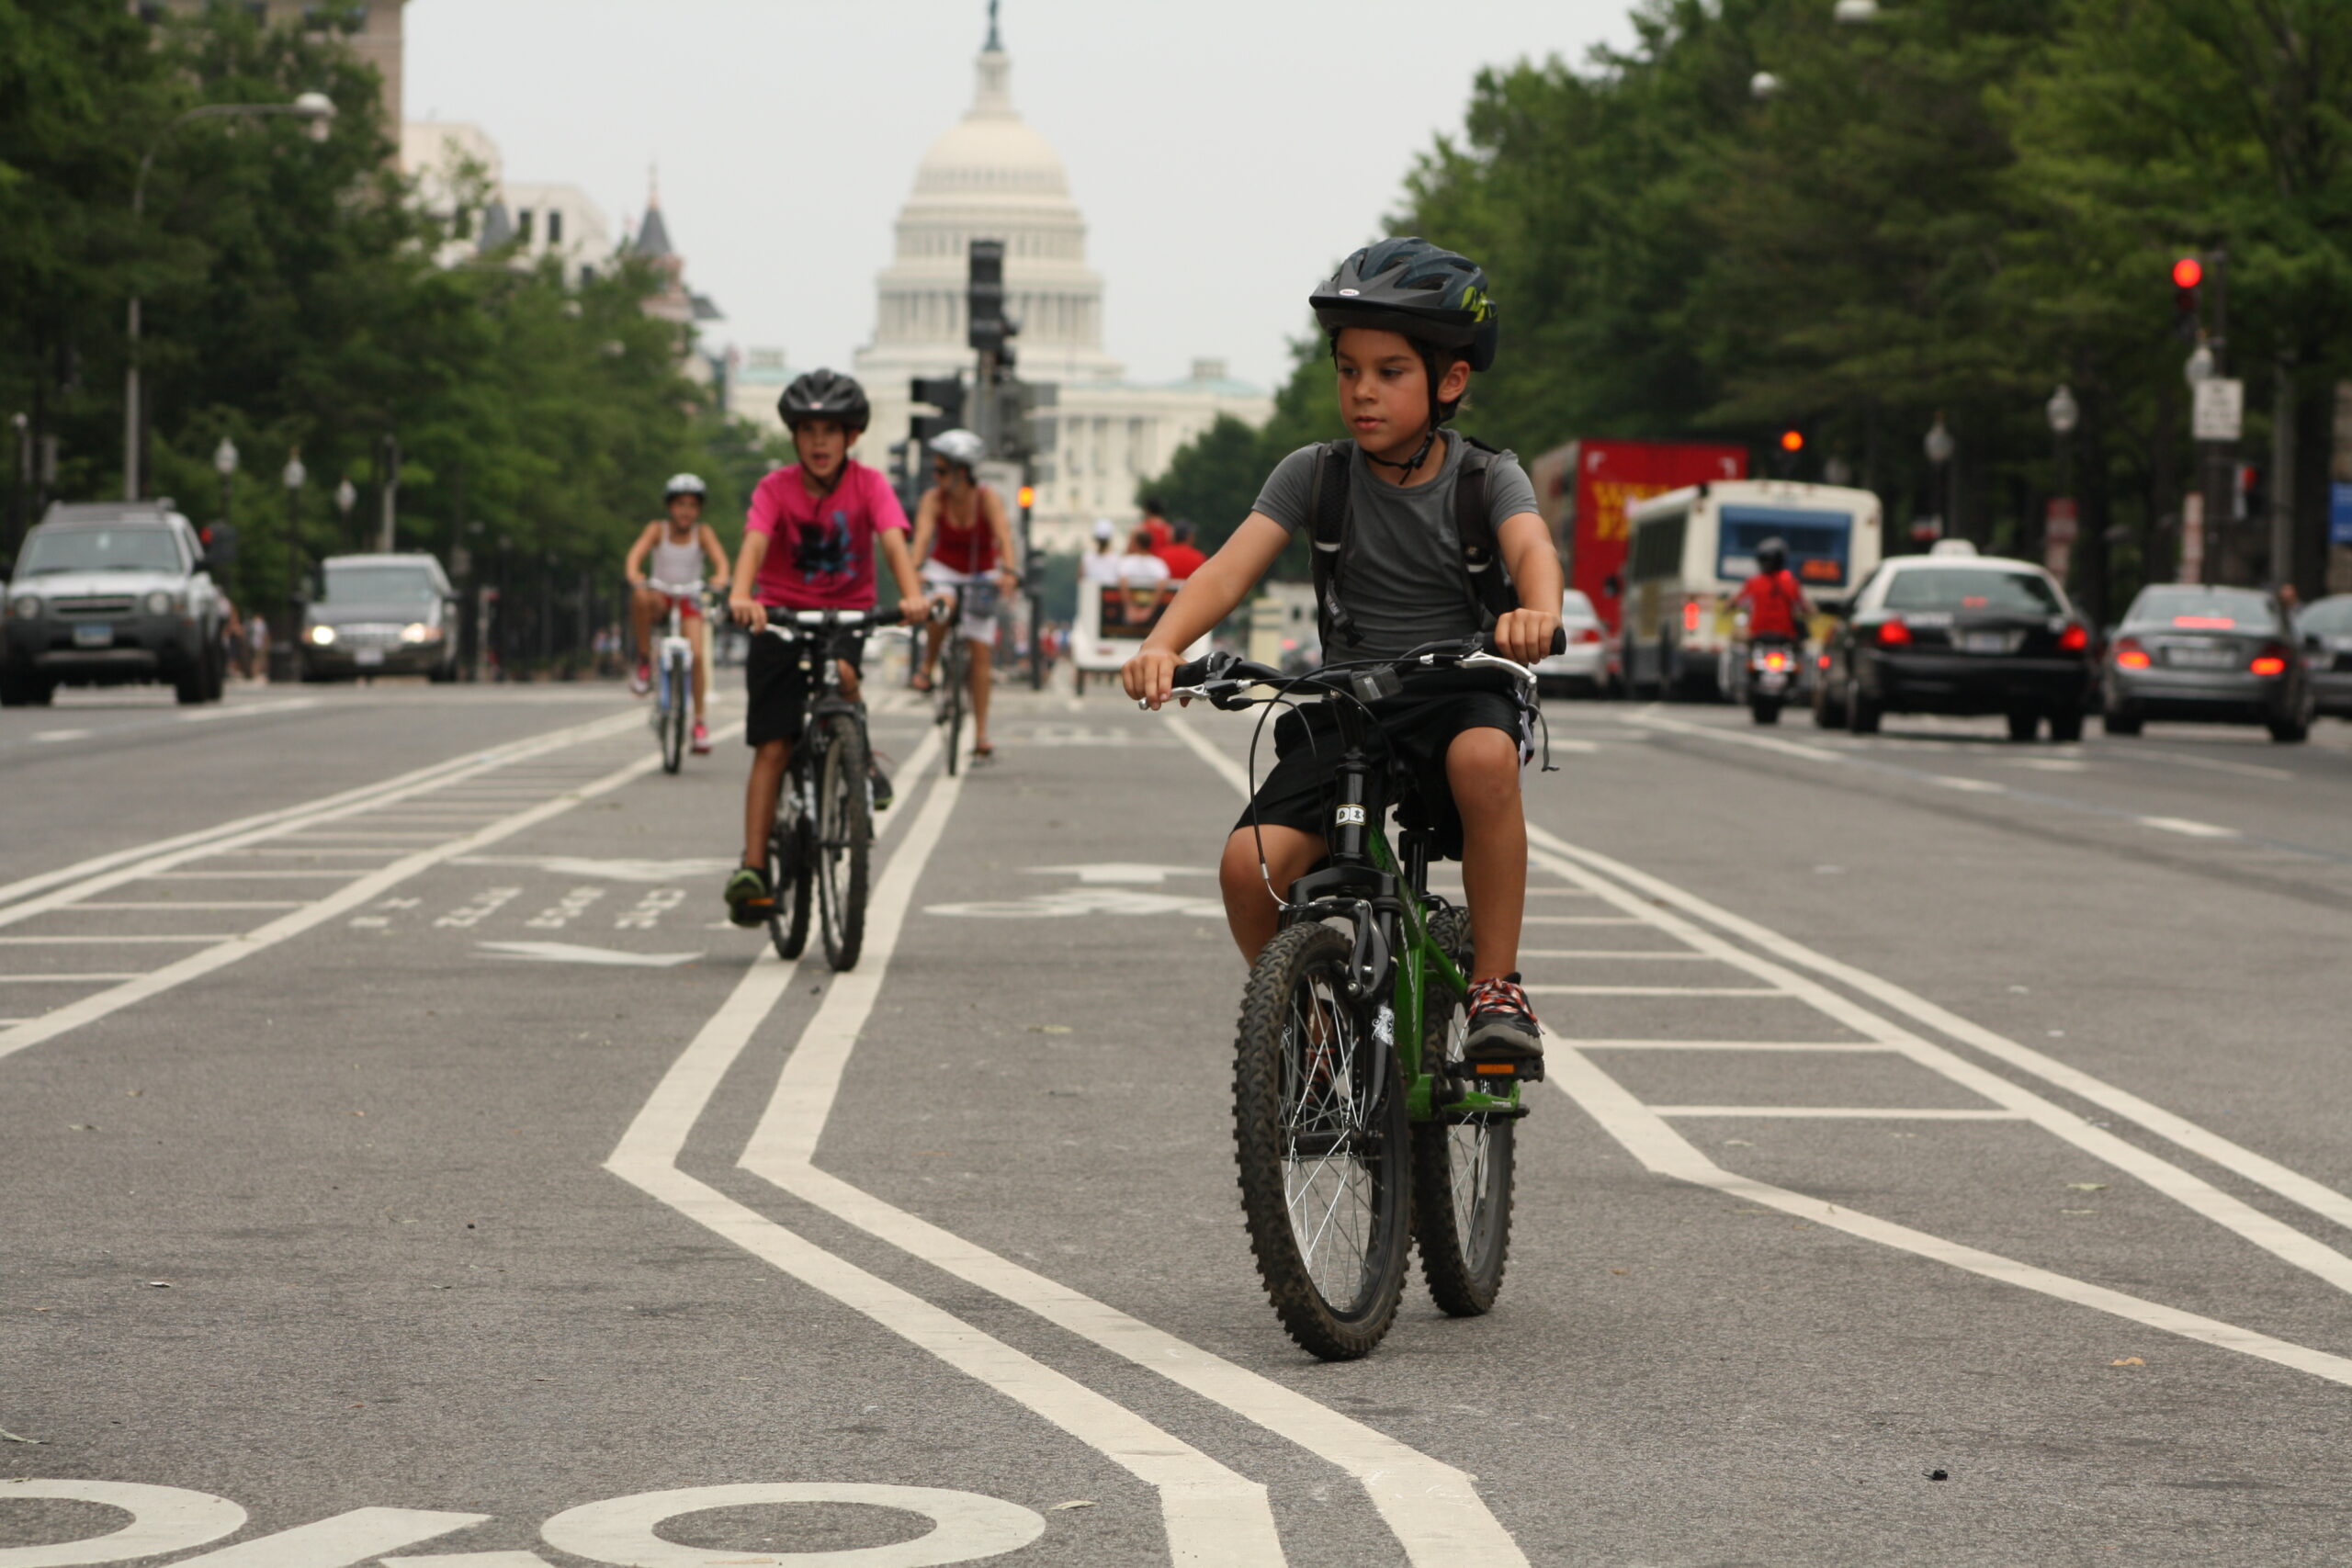 A group of children ride down a bike lane in front of the U.S. Capitol building